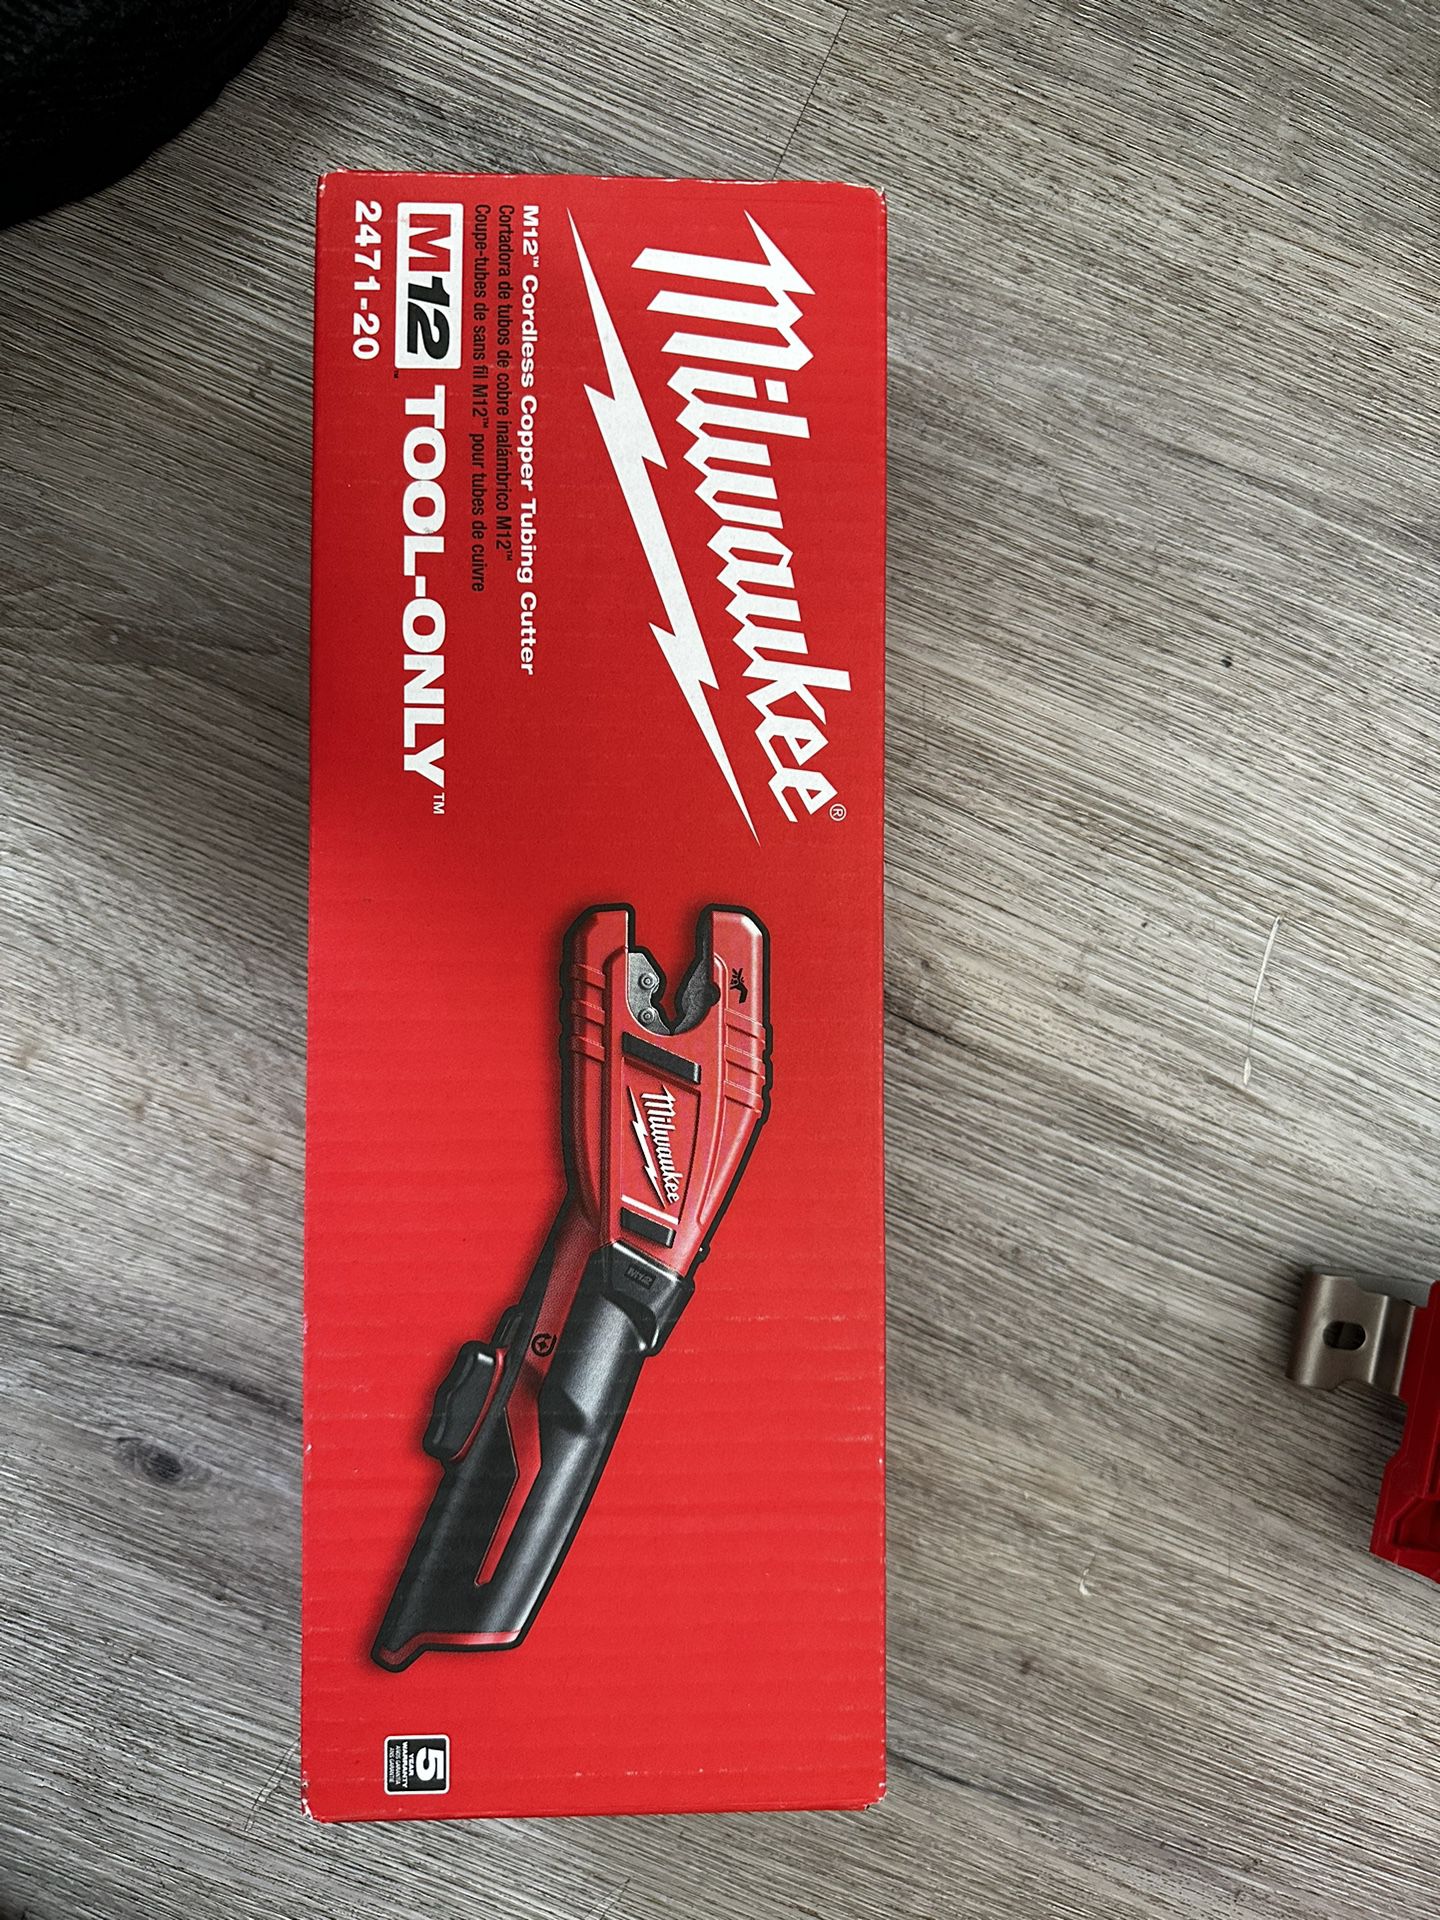 Milwaukee 2471-20 M12 Cordless Copper Tubing Cutter - Red for sale online